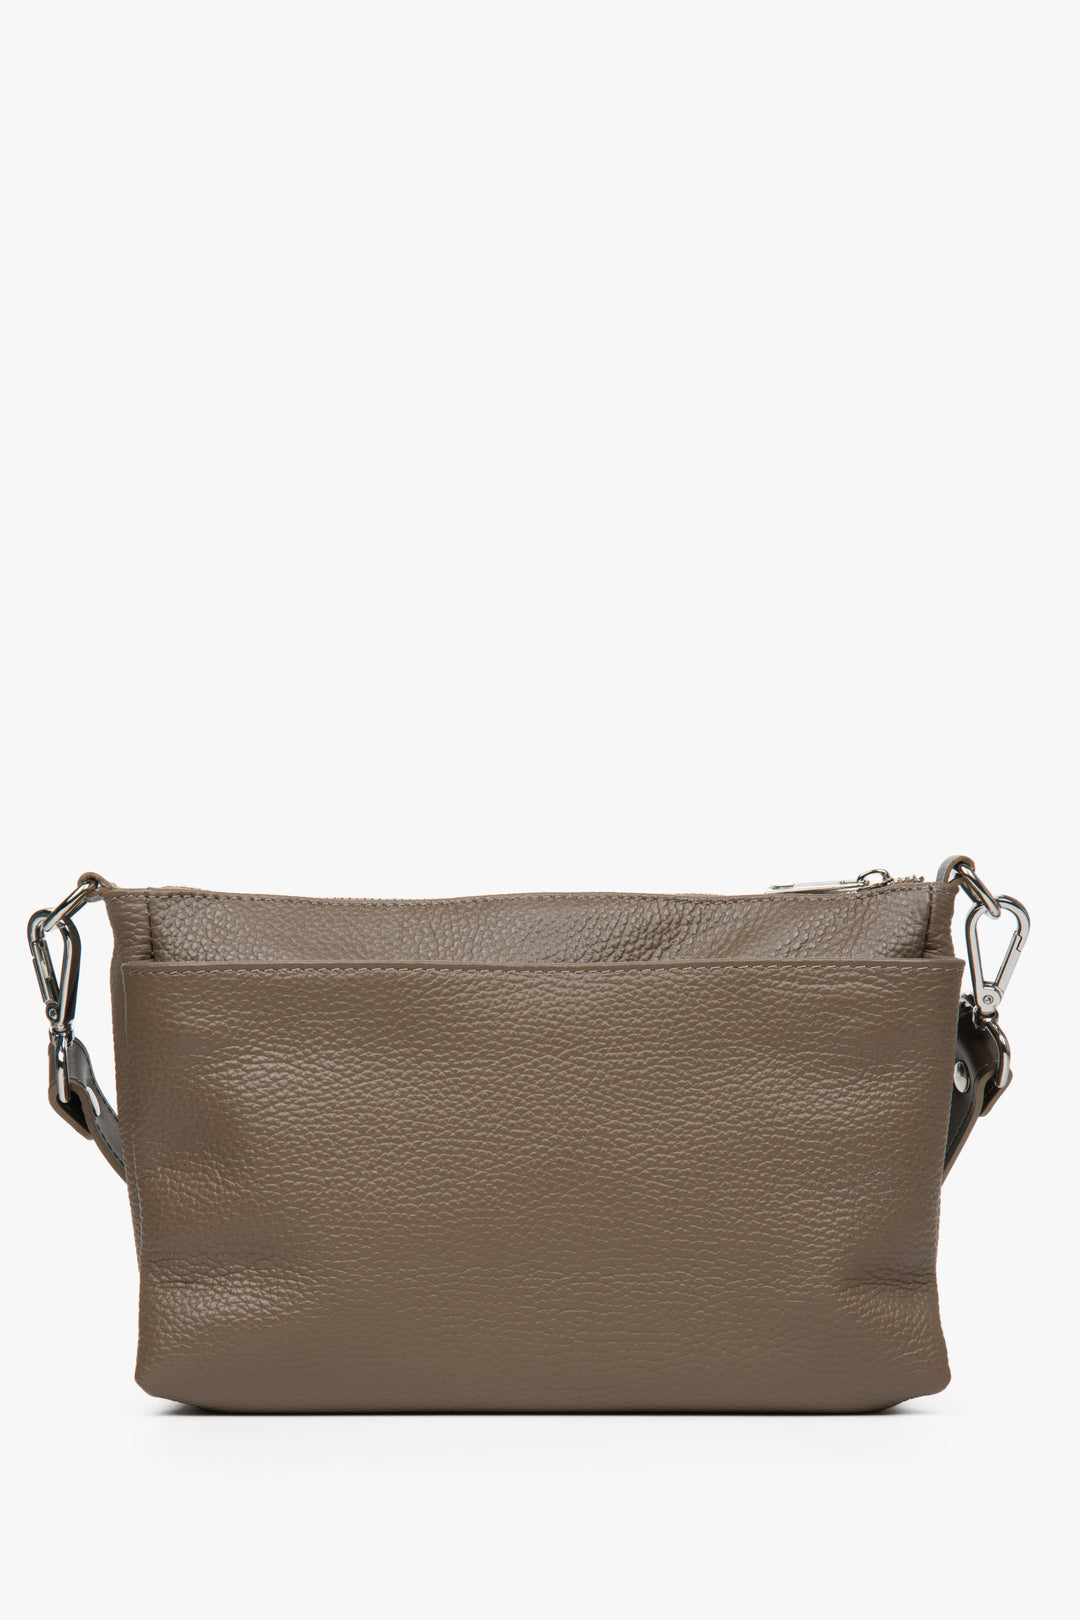 Women's brown crossbody bag made from genuine leather by Estro